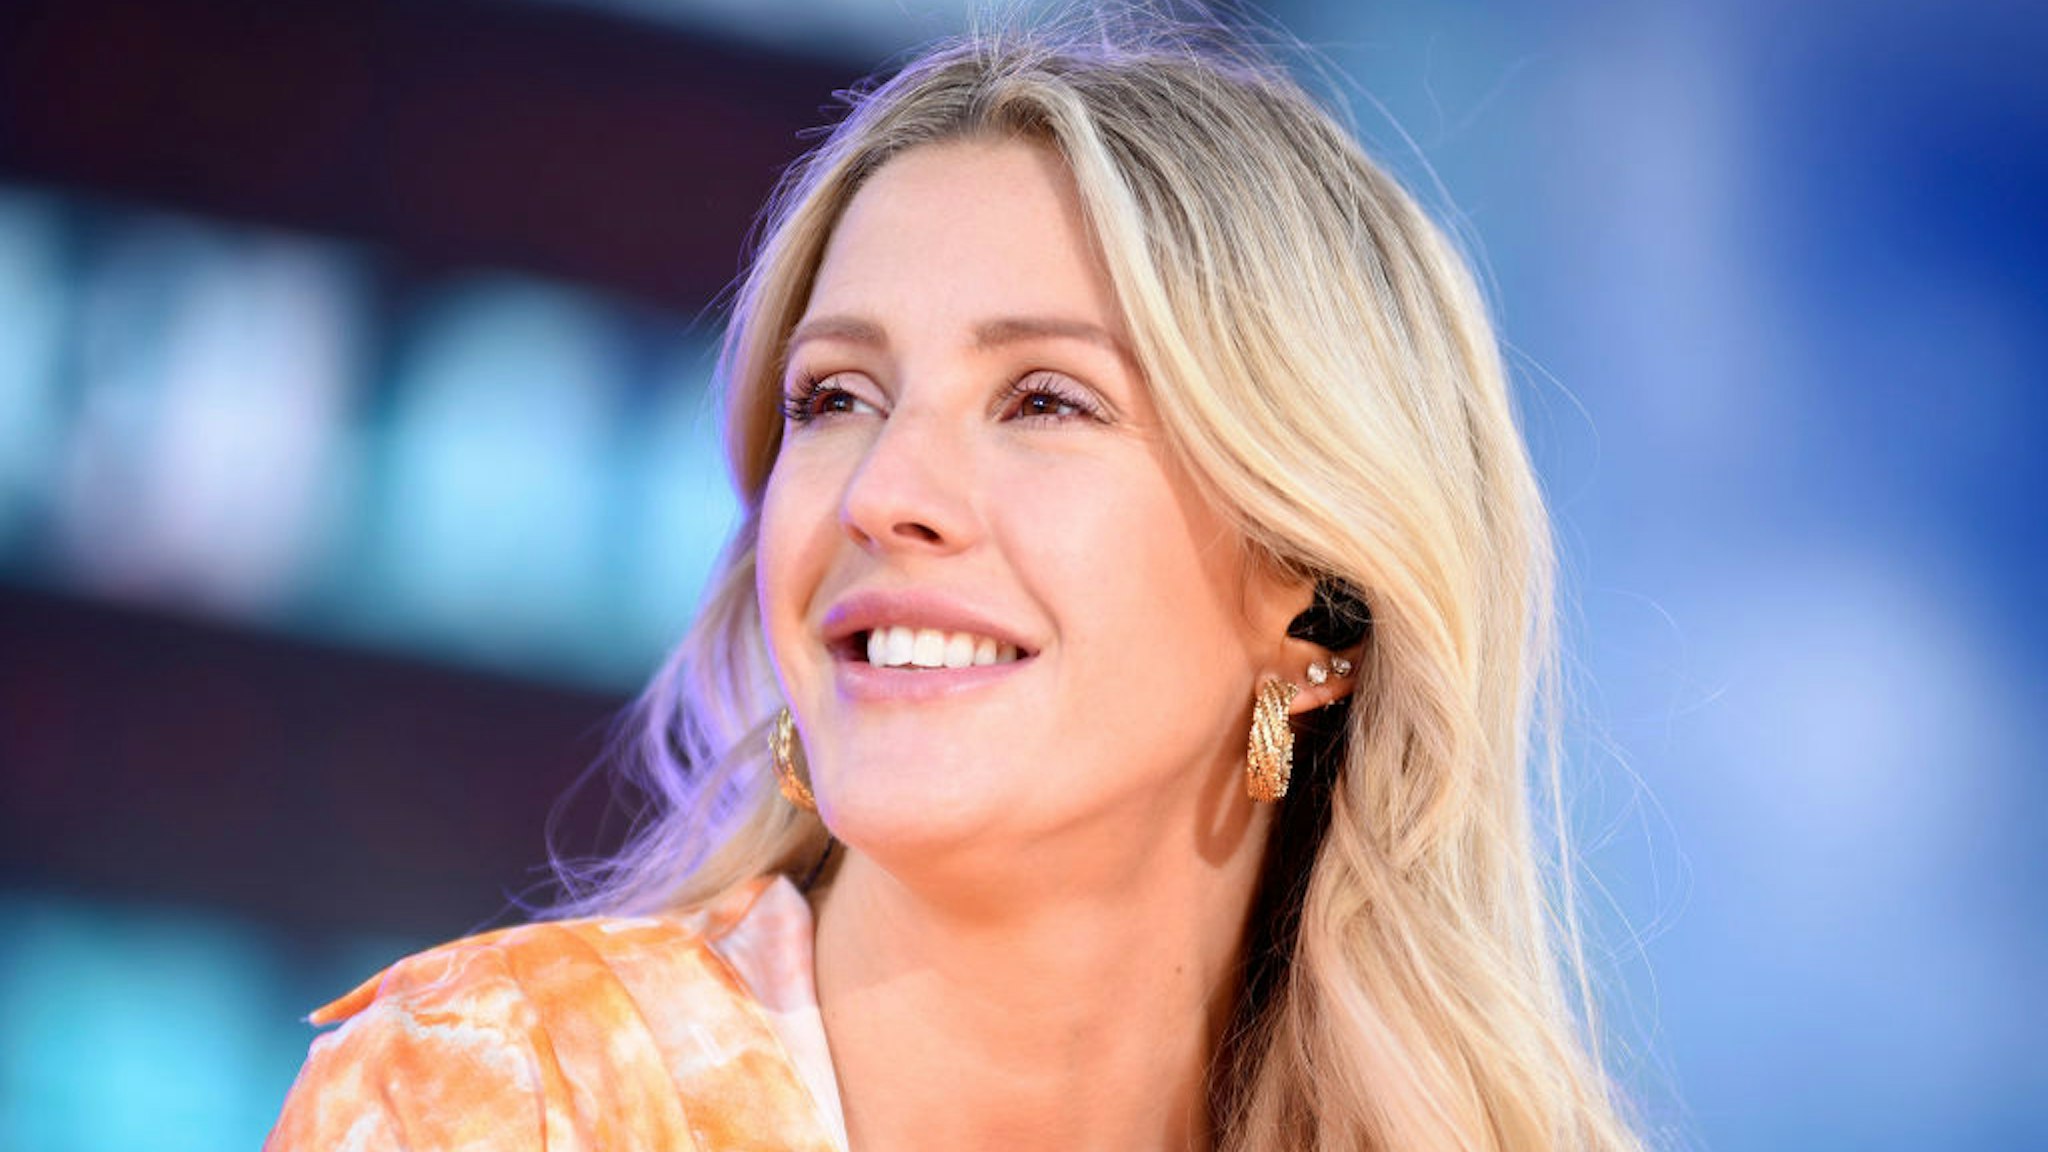 Ellie Goulding performs live from Central Park as part of the GMA Summer Concert Series on "Good Morning America," Friday, June 14, 2019, airing on ABC. GMA19(Photo by Paula Lobo/Walt Disney Television via Getty Images)